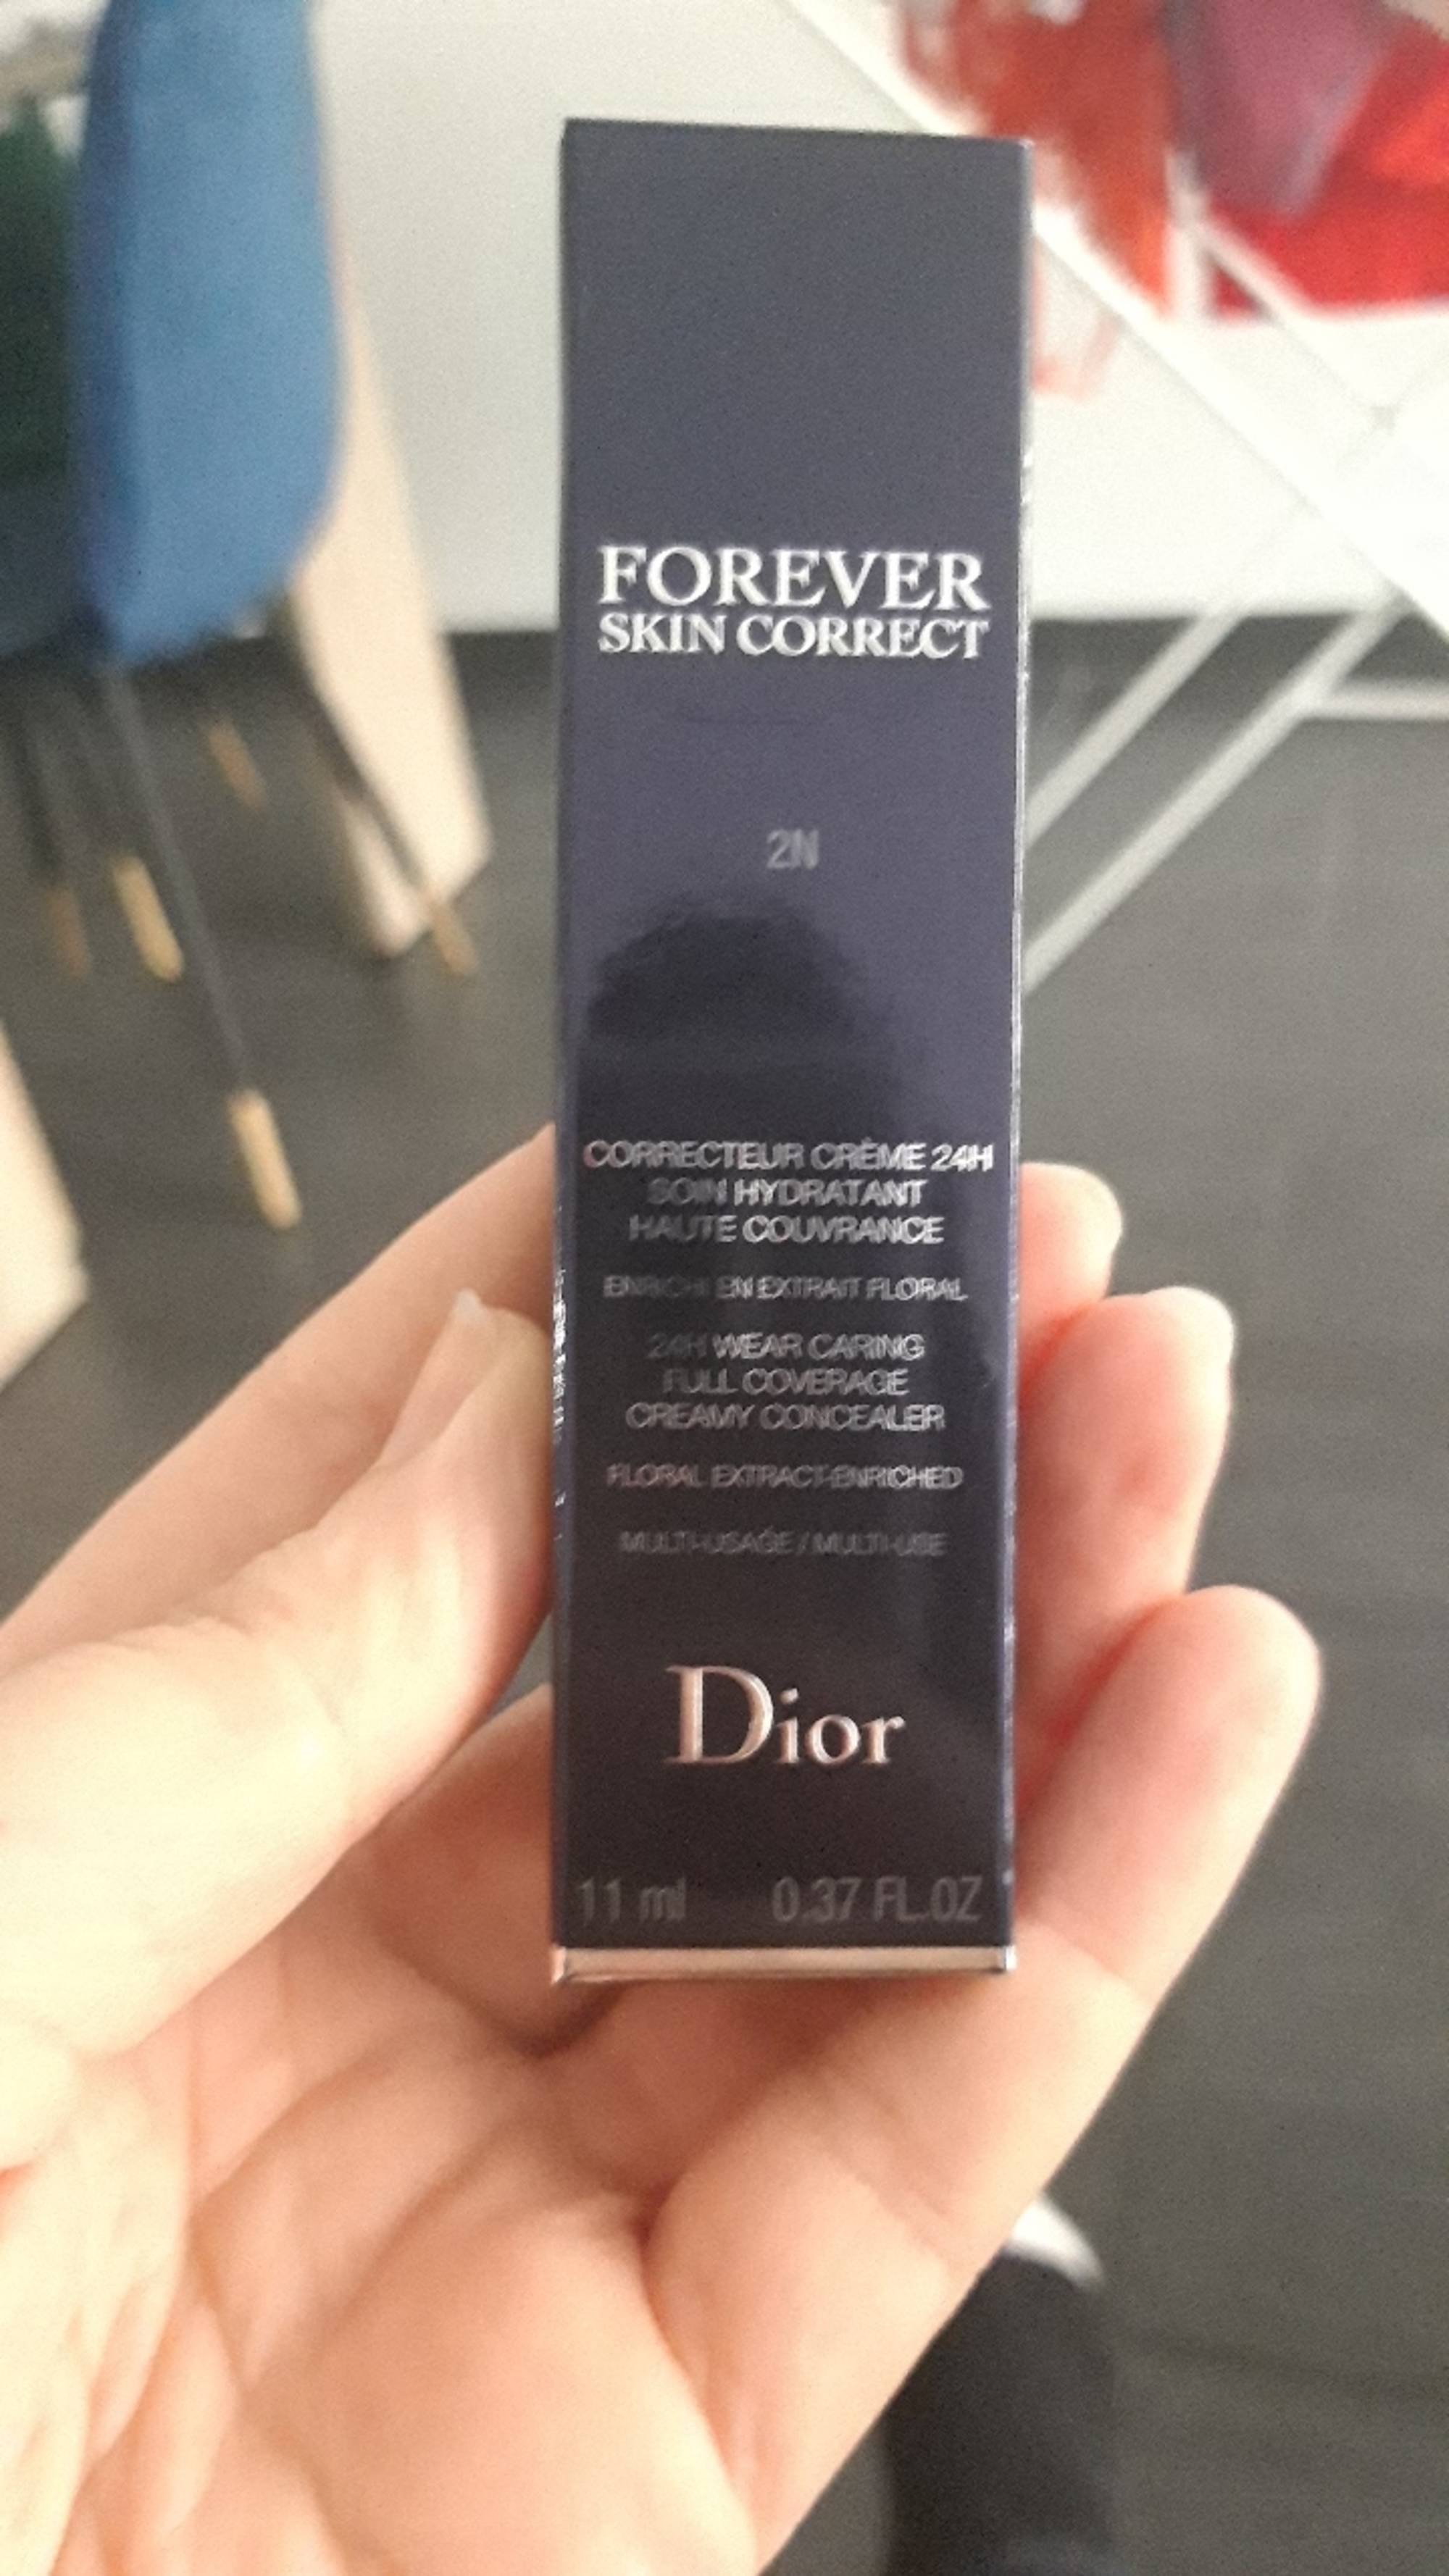 DIOR - Forever skin correct - Soin hydratant haute couvrance